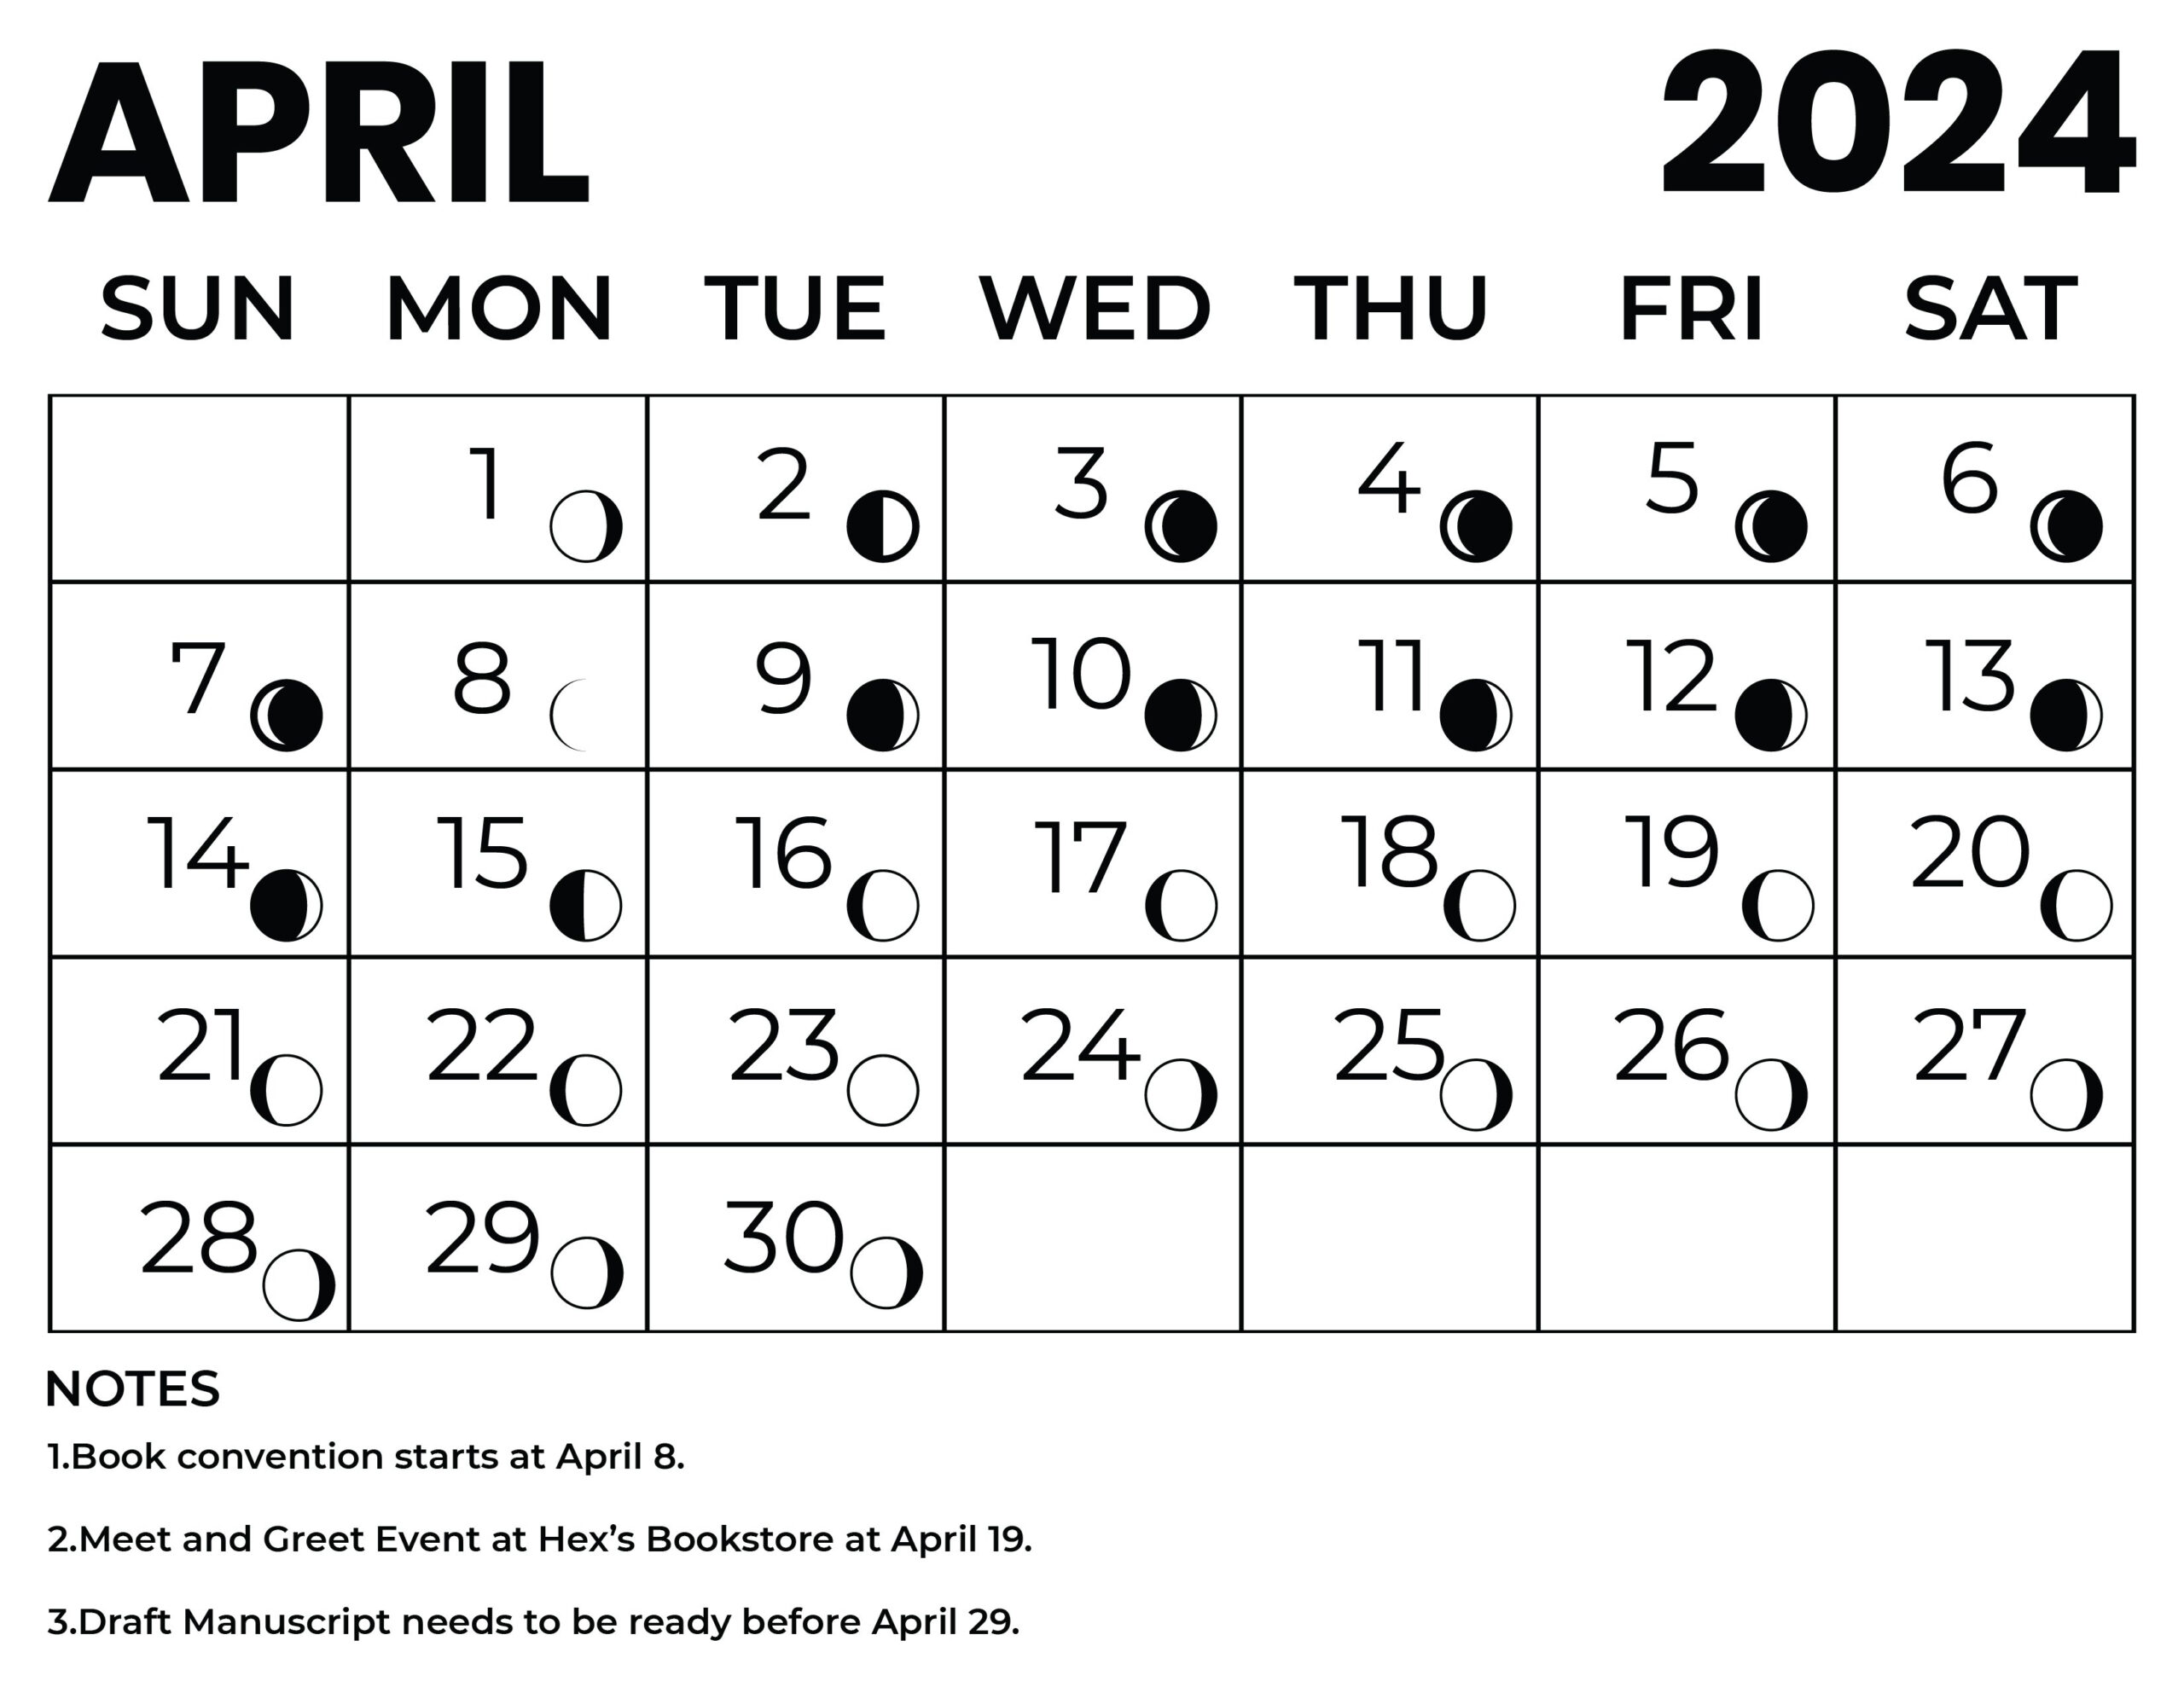 April 2024 Calendar With Moon Phases - Word, Illustrator, Eps, Svg for Printable 2024 Calendar With Moon Phases